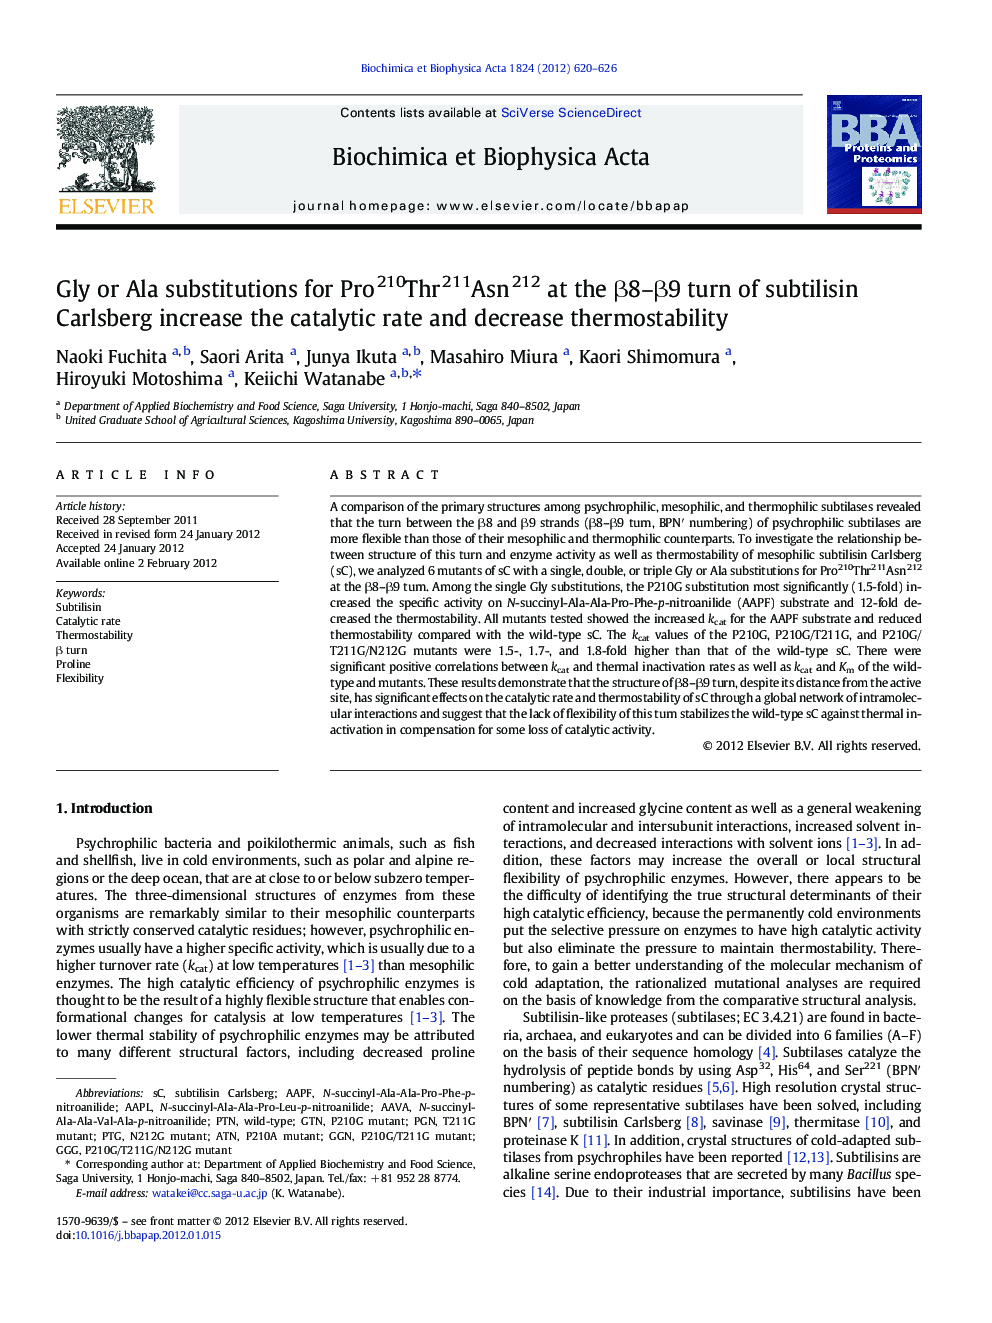 Gly or Ala substitutions for Pro210Thr211Asn212 at the Î²8-Î²9 turn of subtilisin Carlsberg increase the catalytic rate and decrease thermostability